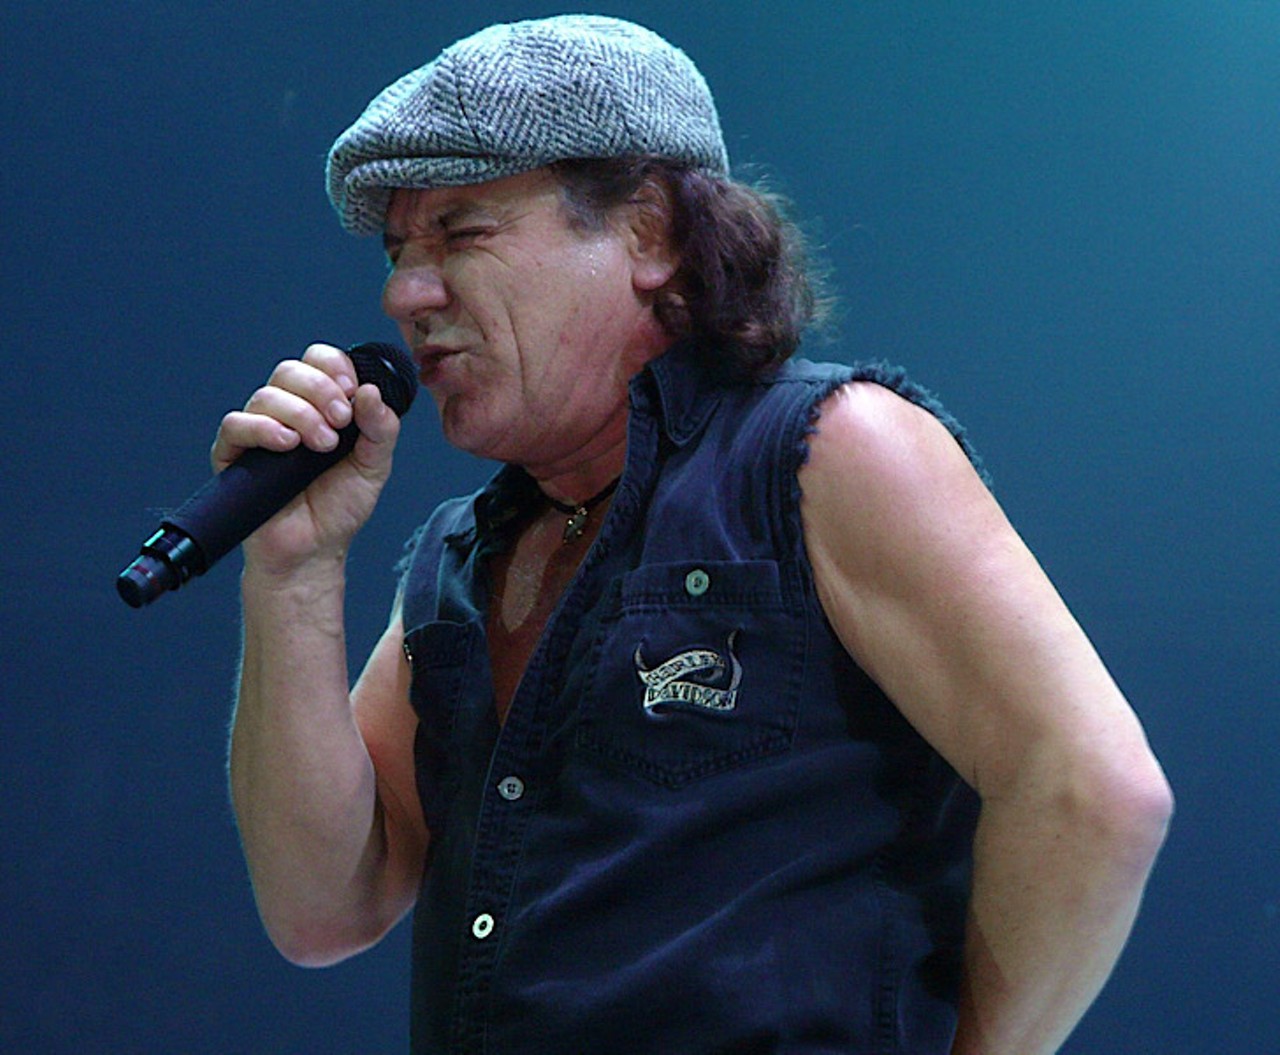 Brian Johnson
Brian Johnson, better known as the lead singer of AC/DC, owns a home on Bird Key in Sarasota. The British singer was actually the third lead singer of the band, and he followed Bon Scott after Scott&#146;s death in 1980. 
Photo by Matt Becker via Wikimedia Commons